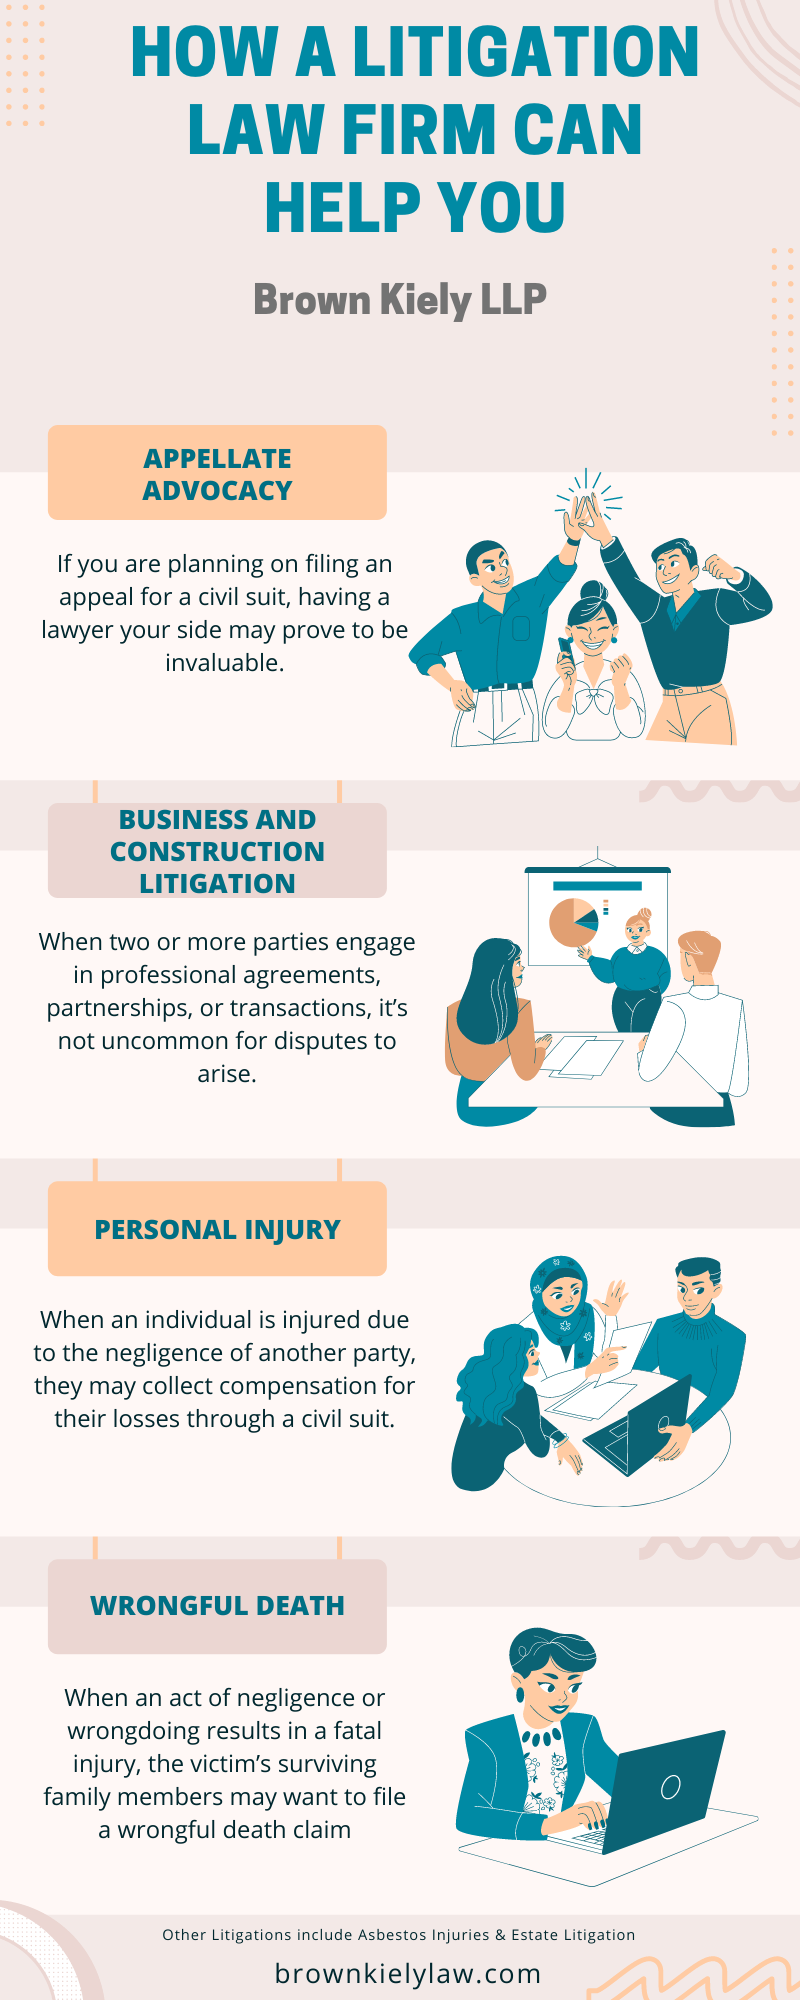 How a Litigation Law Firm Can Help You Infographic